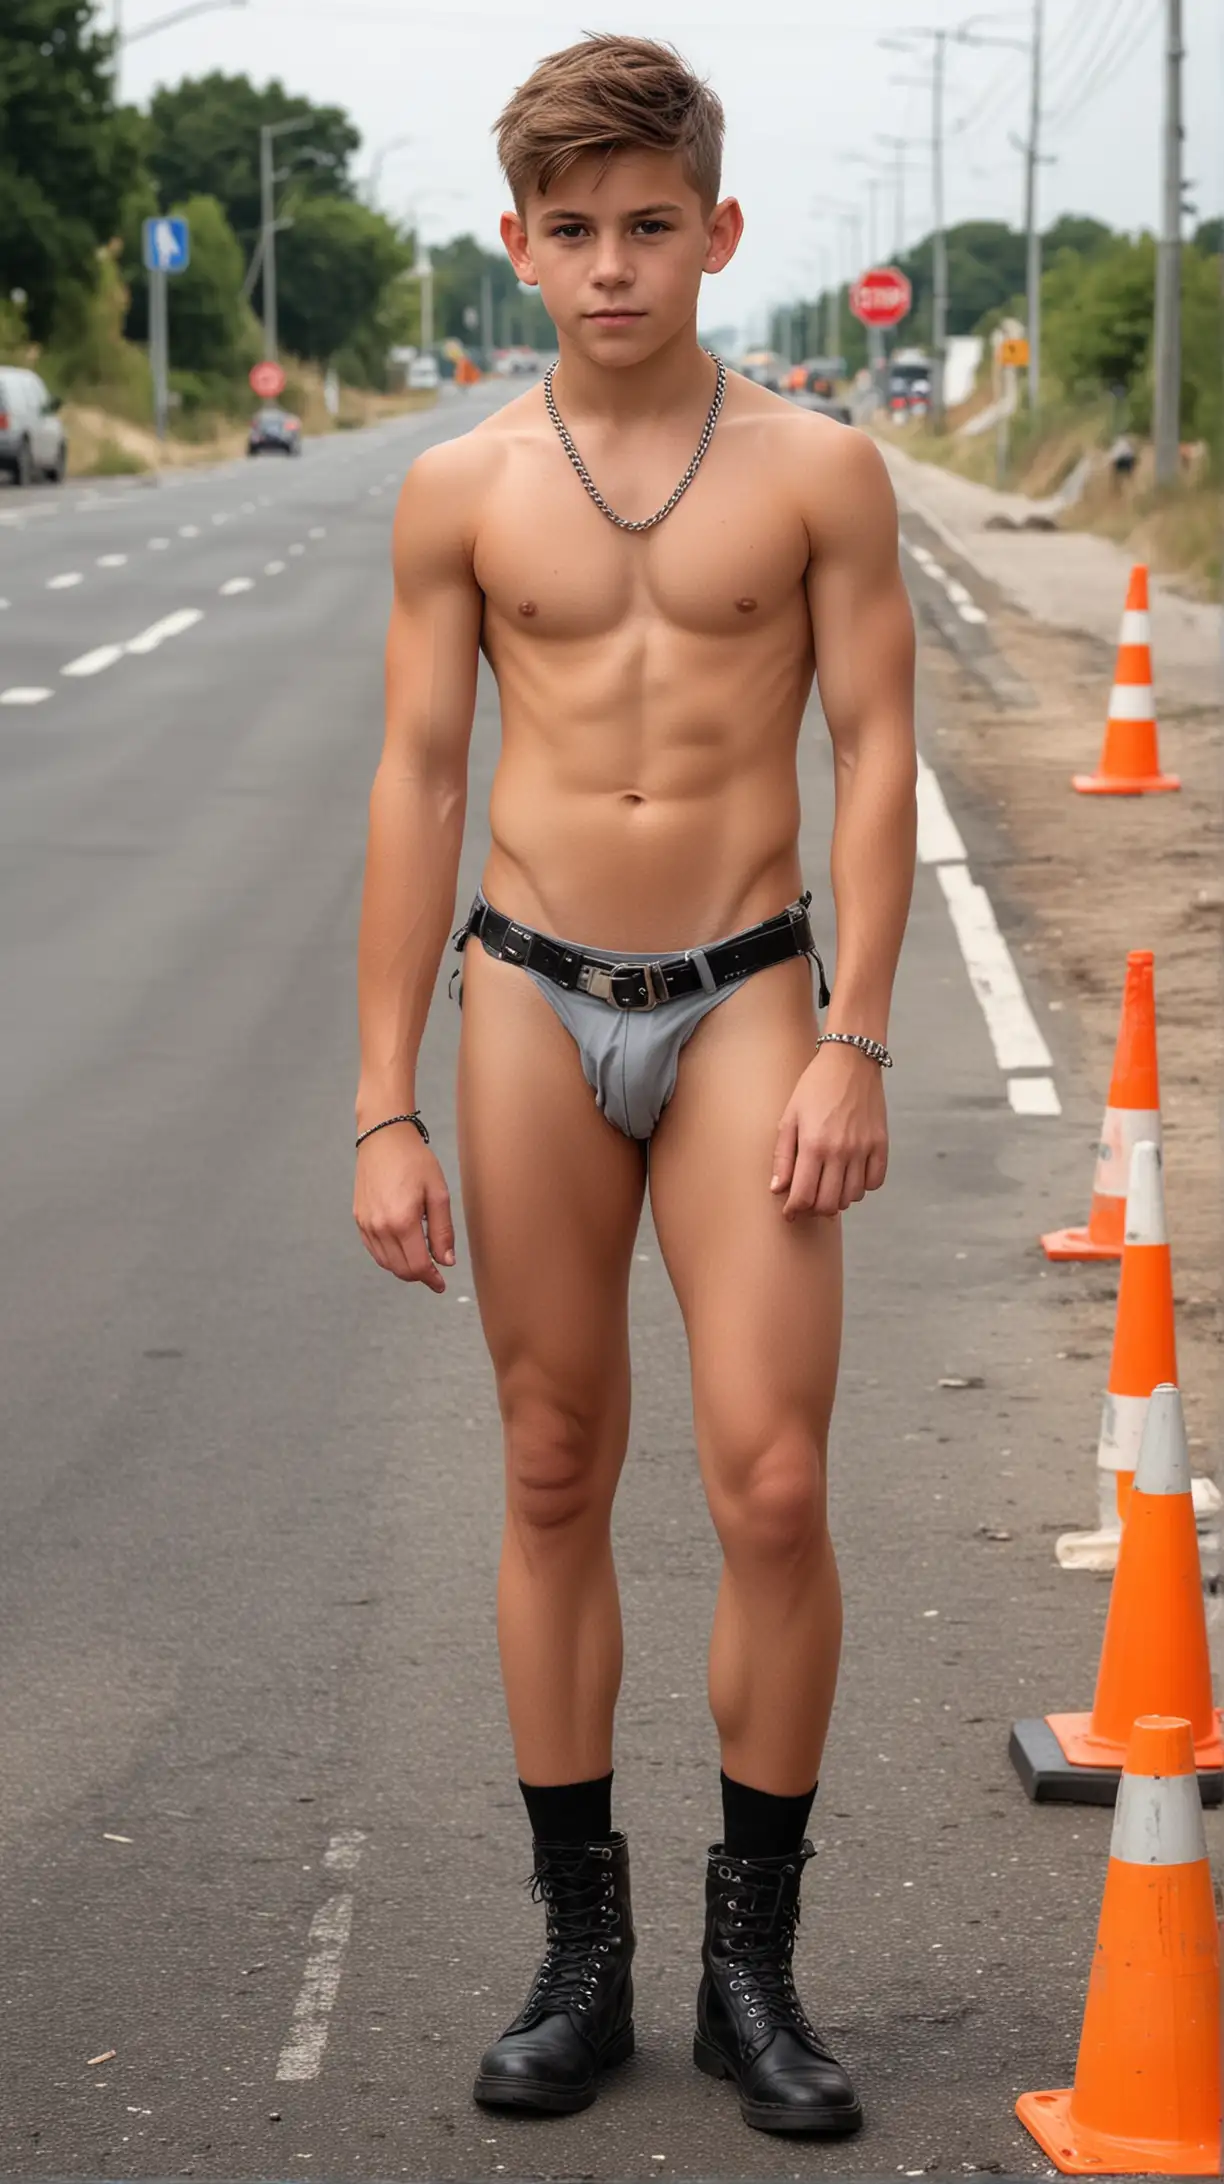 holding a stop sign and surrounded by road-signs and traffic-cones in roadworks, very cute small 18-year old very pretty teenage young muscular slave-boy, naked except yellow hi-visibility day-glow reflective tiny safety-briefs and fluorescent road-workers open-fronted vest, very dark tanned, showing off his masculine feet and toes in metal flipflop sandals ,  steel ankle chains and steel slavery cuffs, naked, cool-kid's stylish haircut, cute boyish modelling looks, deeply-tanned beautiful, young muscular and lean, ripped defined boy muscles, six pack abs, 